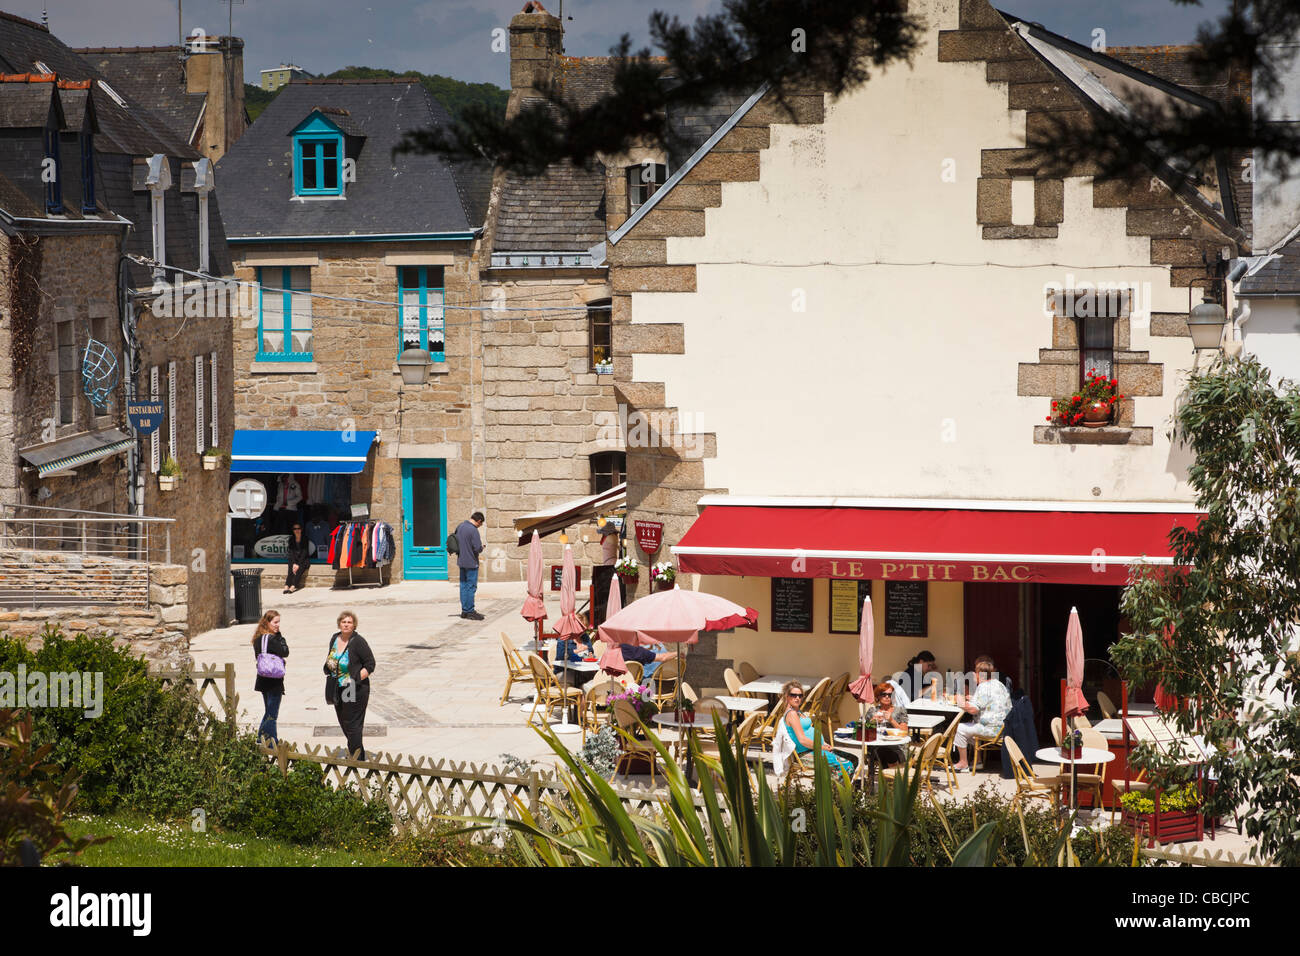 People relaxing in Concarneau, Finistere, Brittany, France Stock Photo